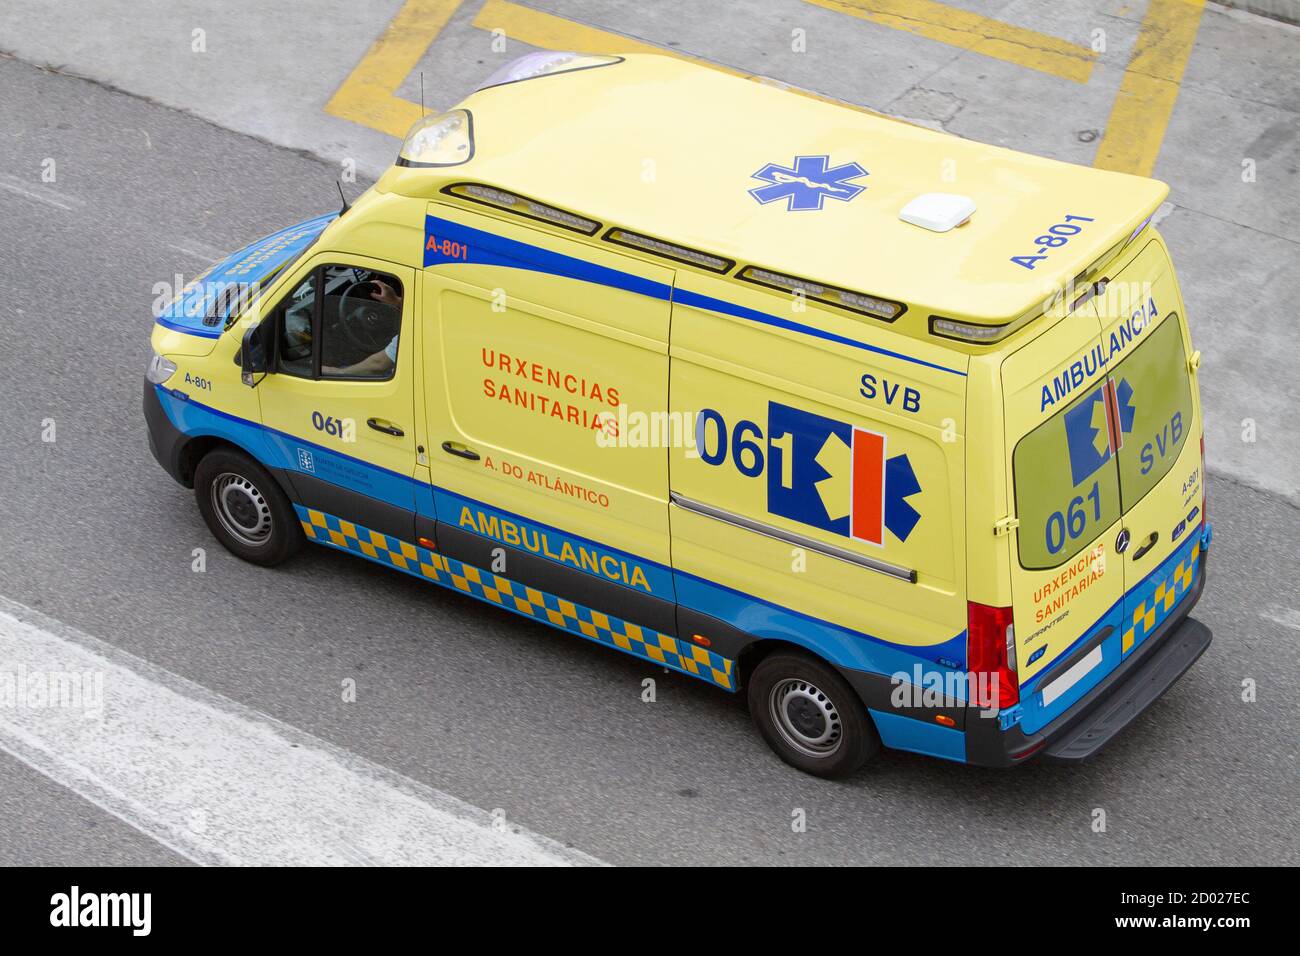 Santiago de Compostela, Spain; July 31, 2020: Ambulance of Galicia health care on the road. 061 Emergency Stock Photo